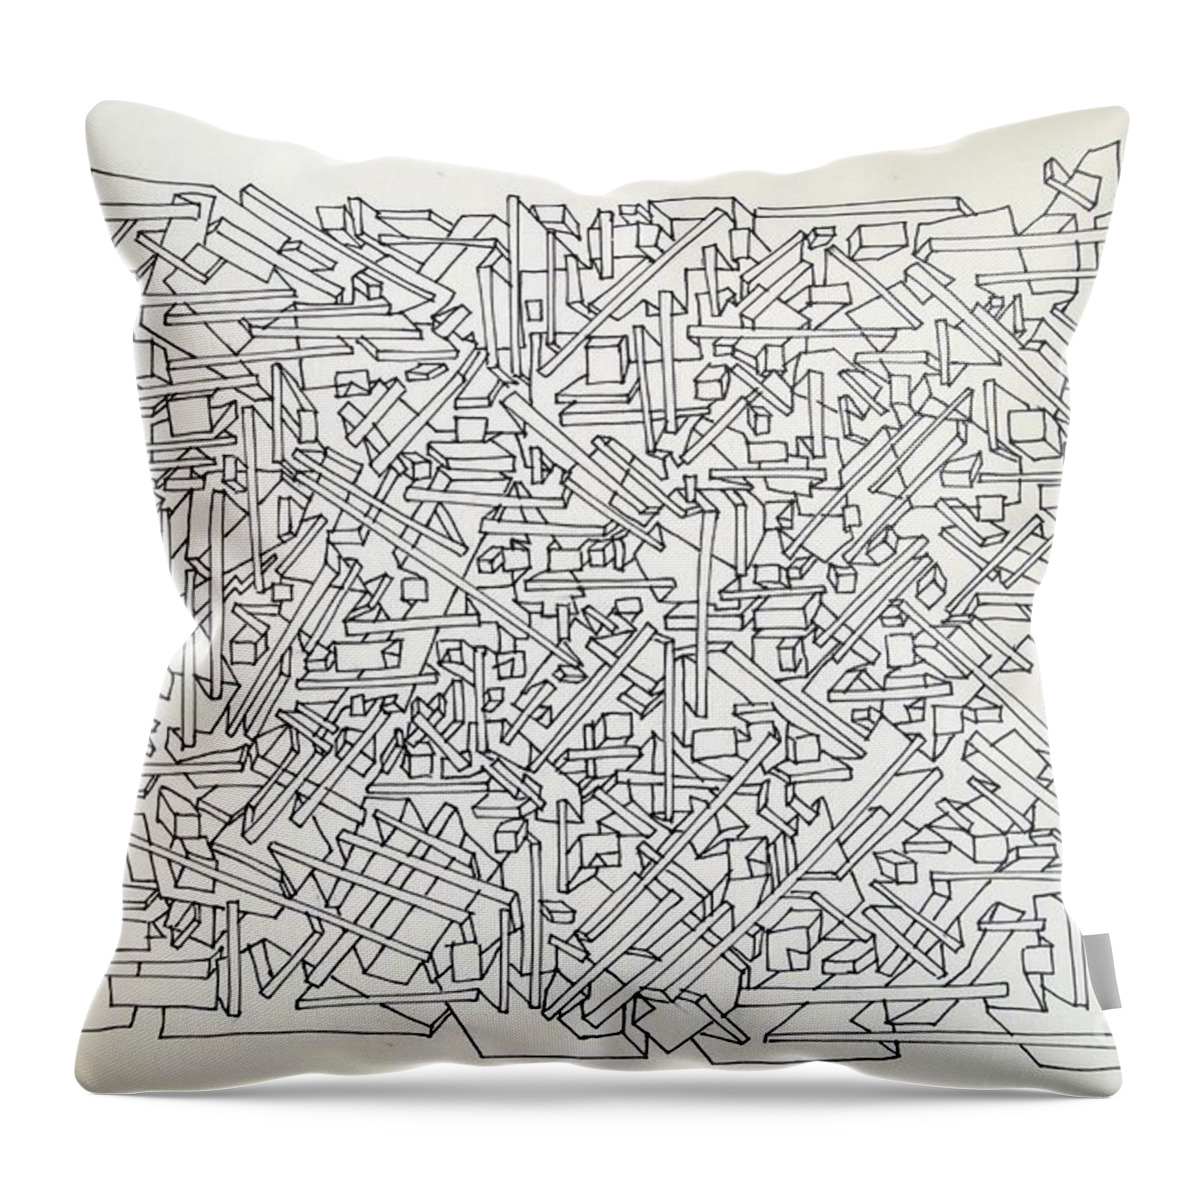 Pen And Ink Drawing Throw Pillow featuring the drawing Urban Planning by Nancy Kane Chapman